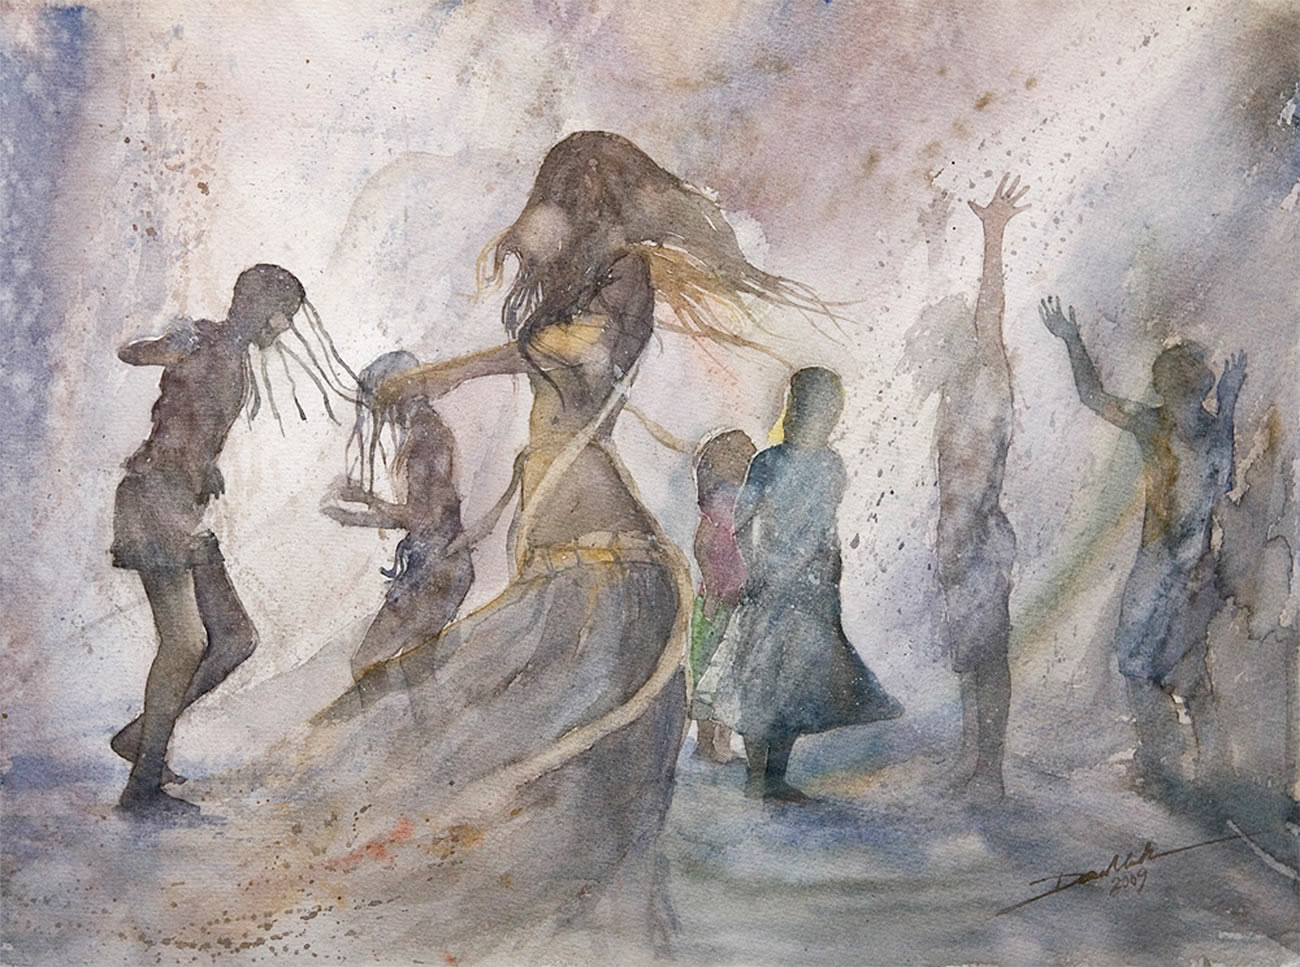 dancing on the streets, watercolor by minh dam